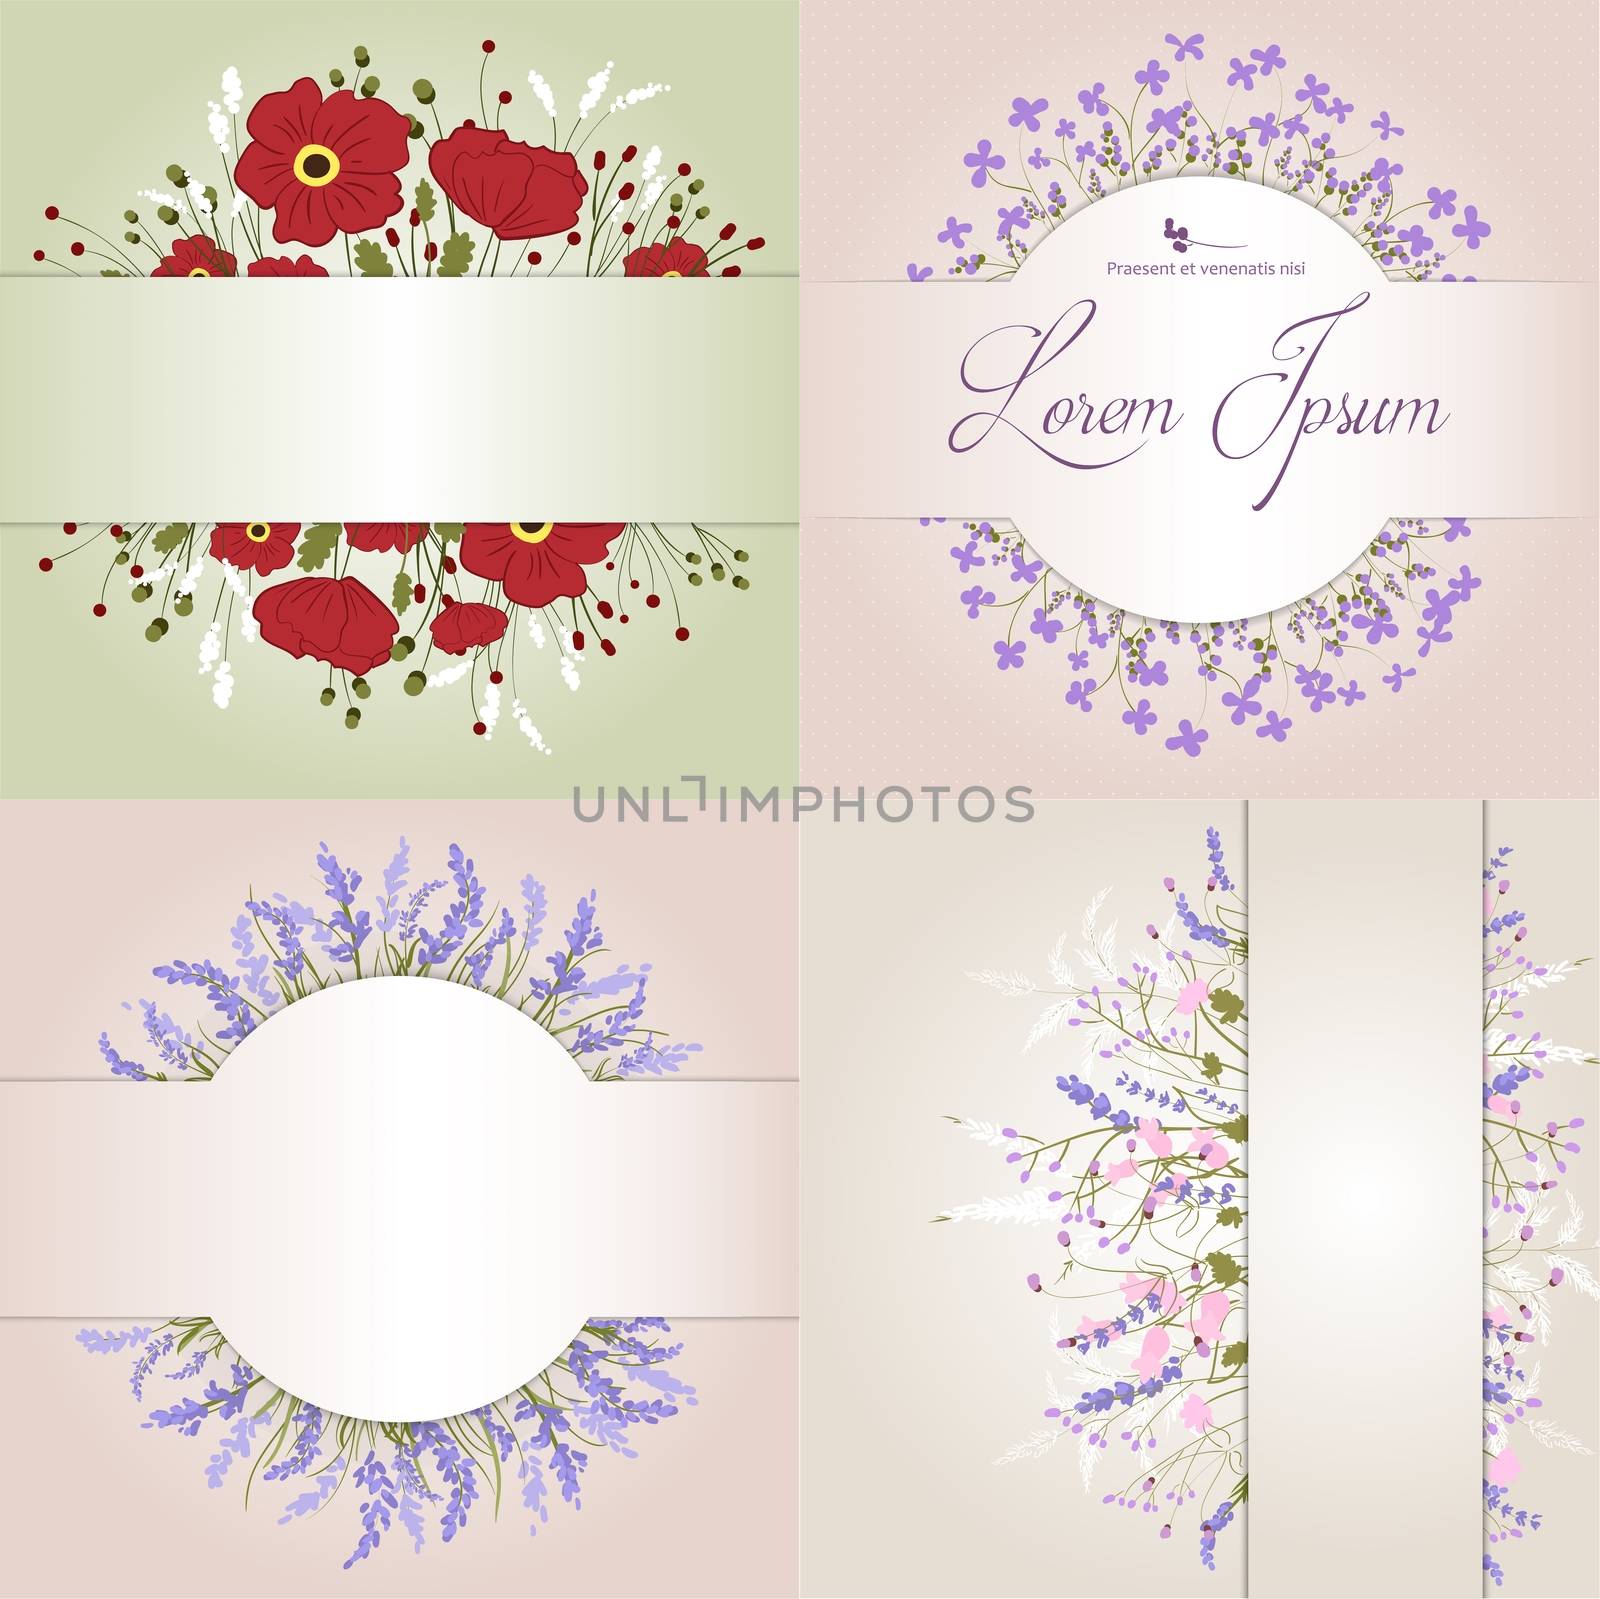 Composition of delicate wild flowers on a beige background with space for your text. Card. illustration